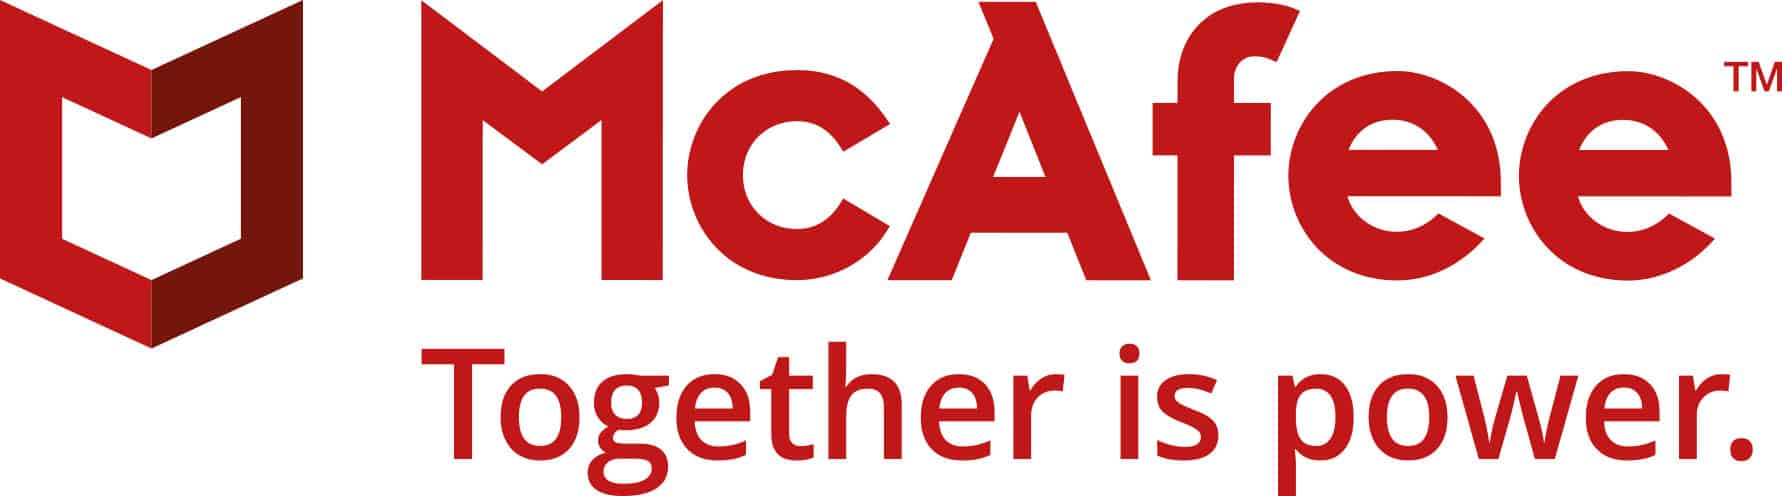 McAfee Together is power logo